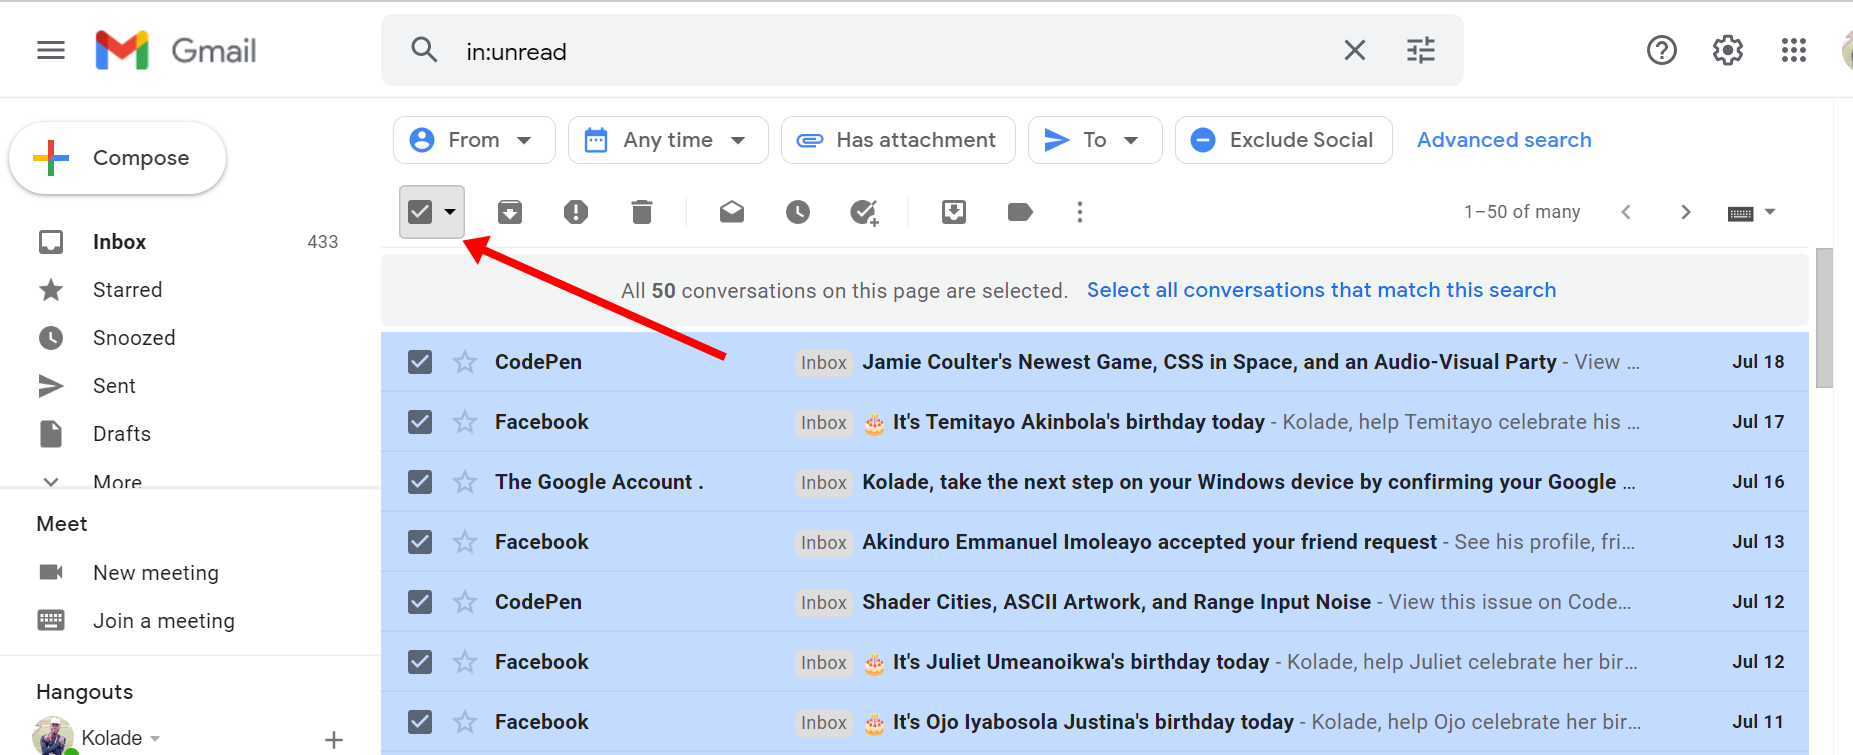 Gmail Cleanup: Deleting Files in the Inbox